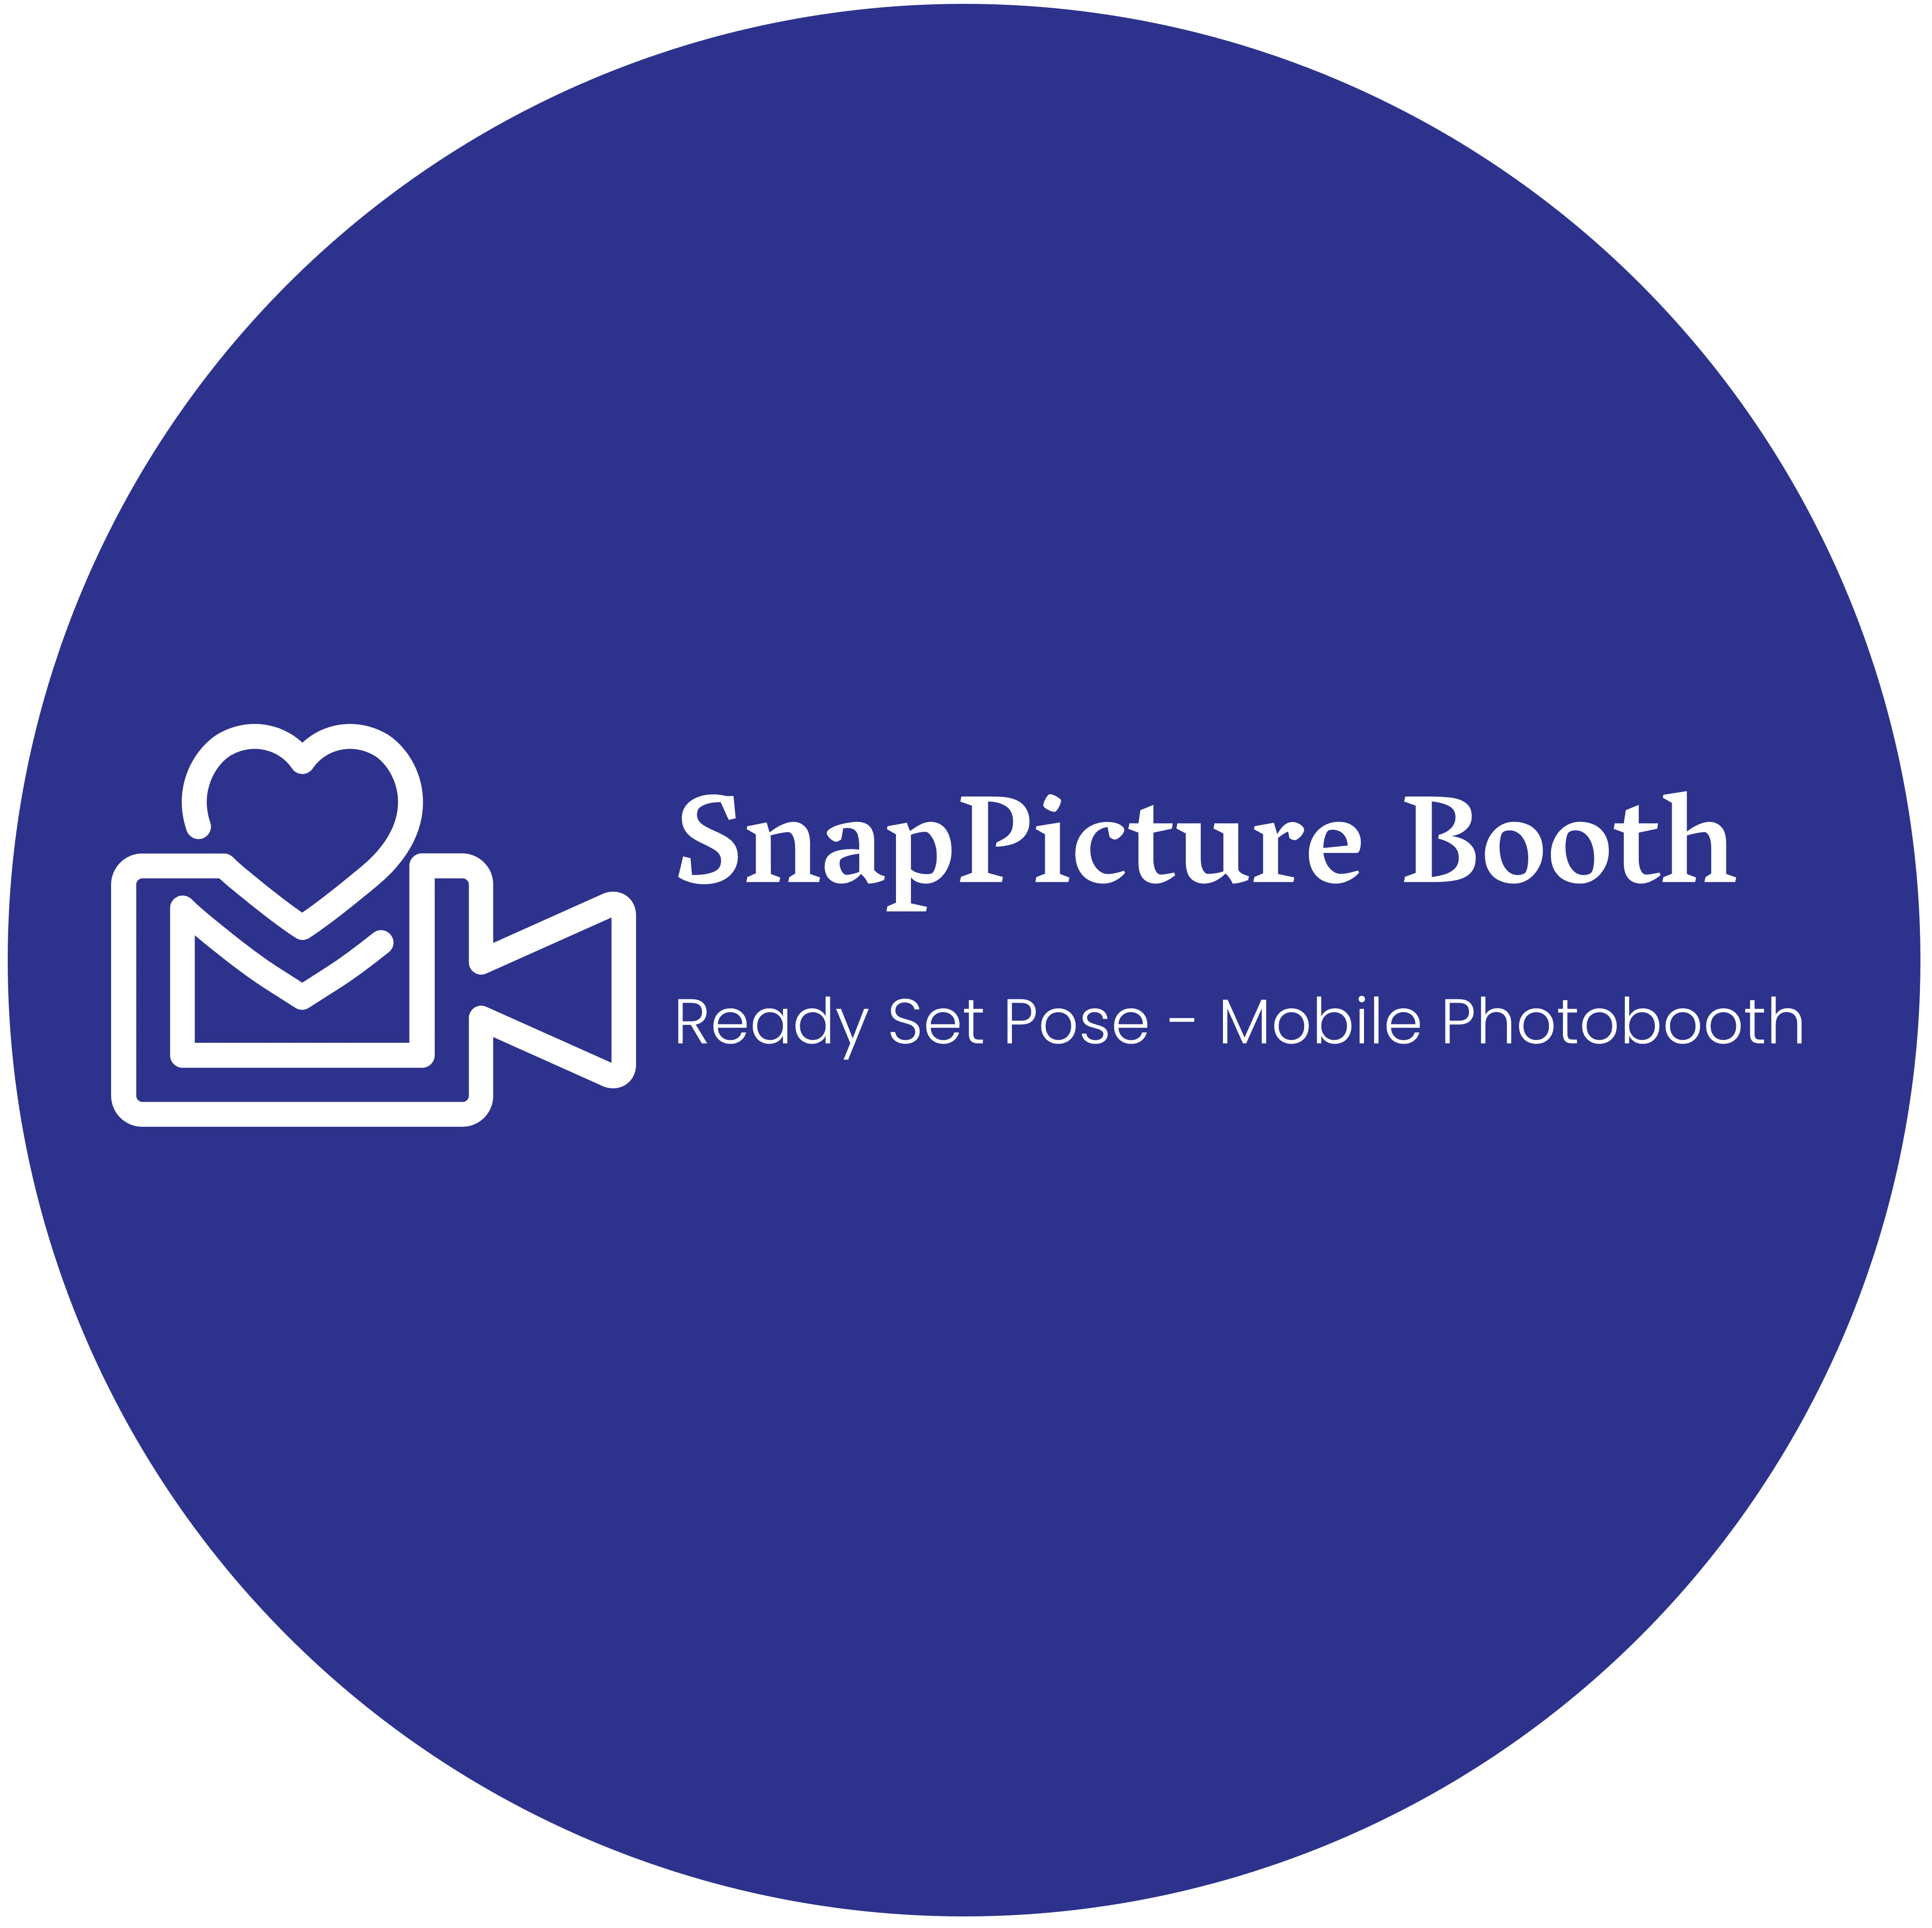 SnapPicture Booth